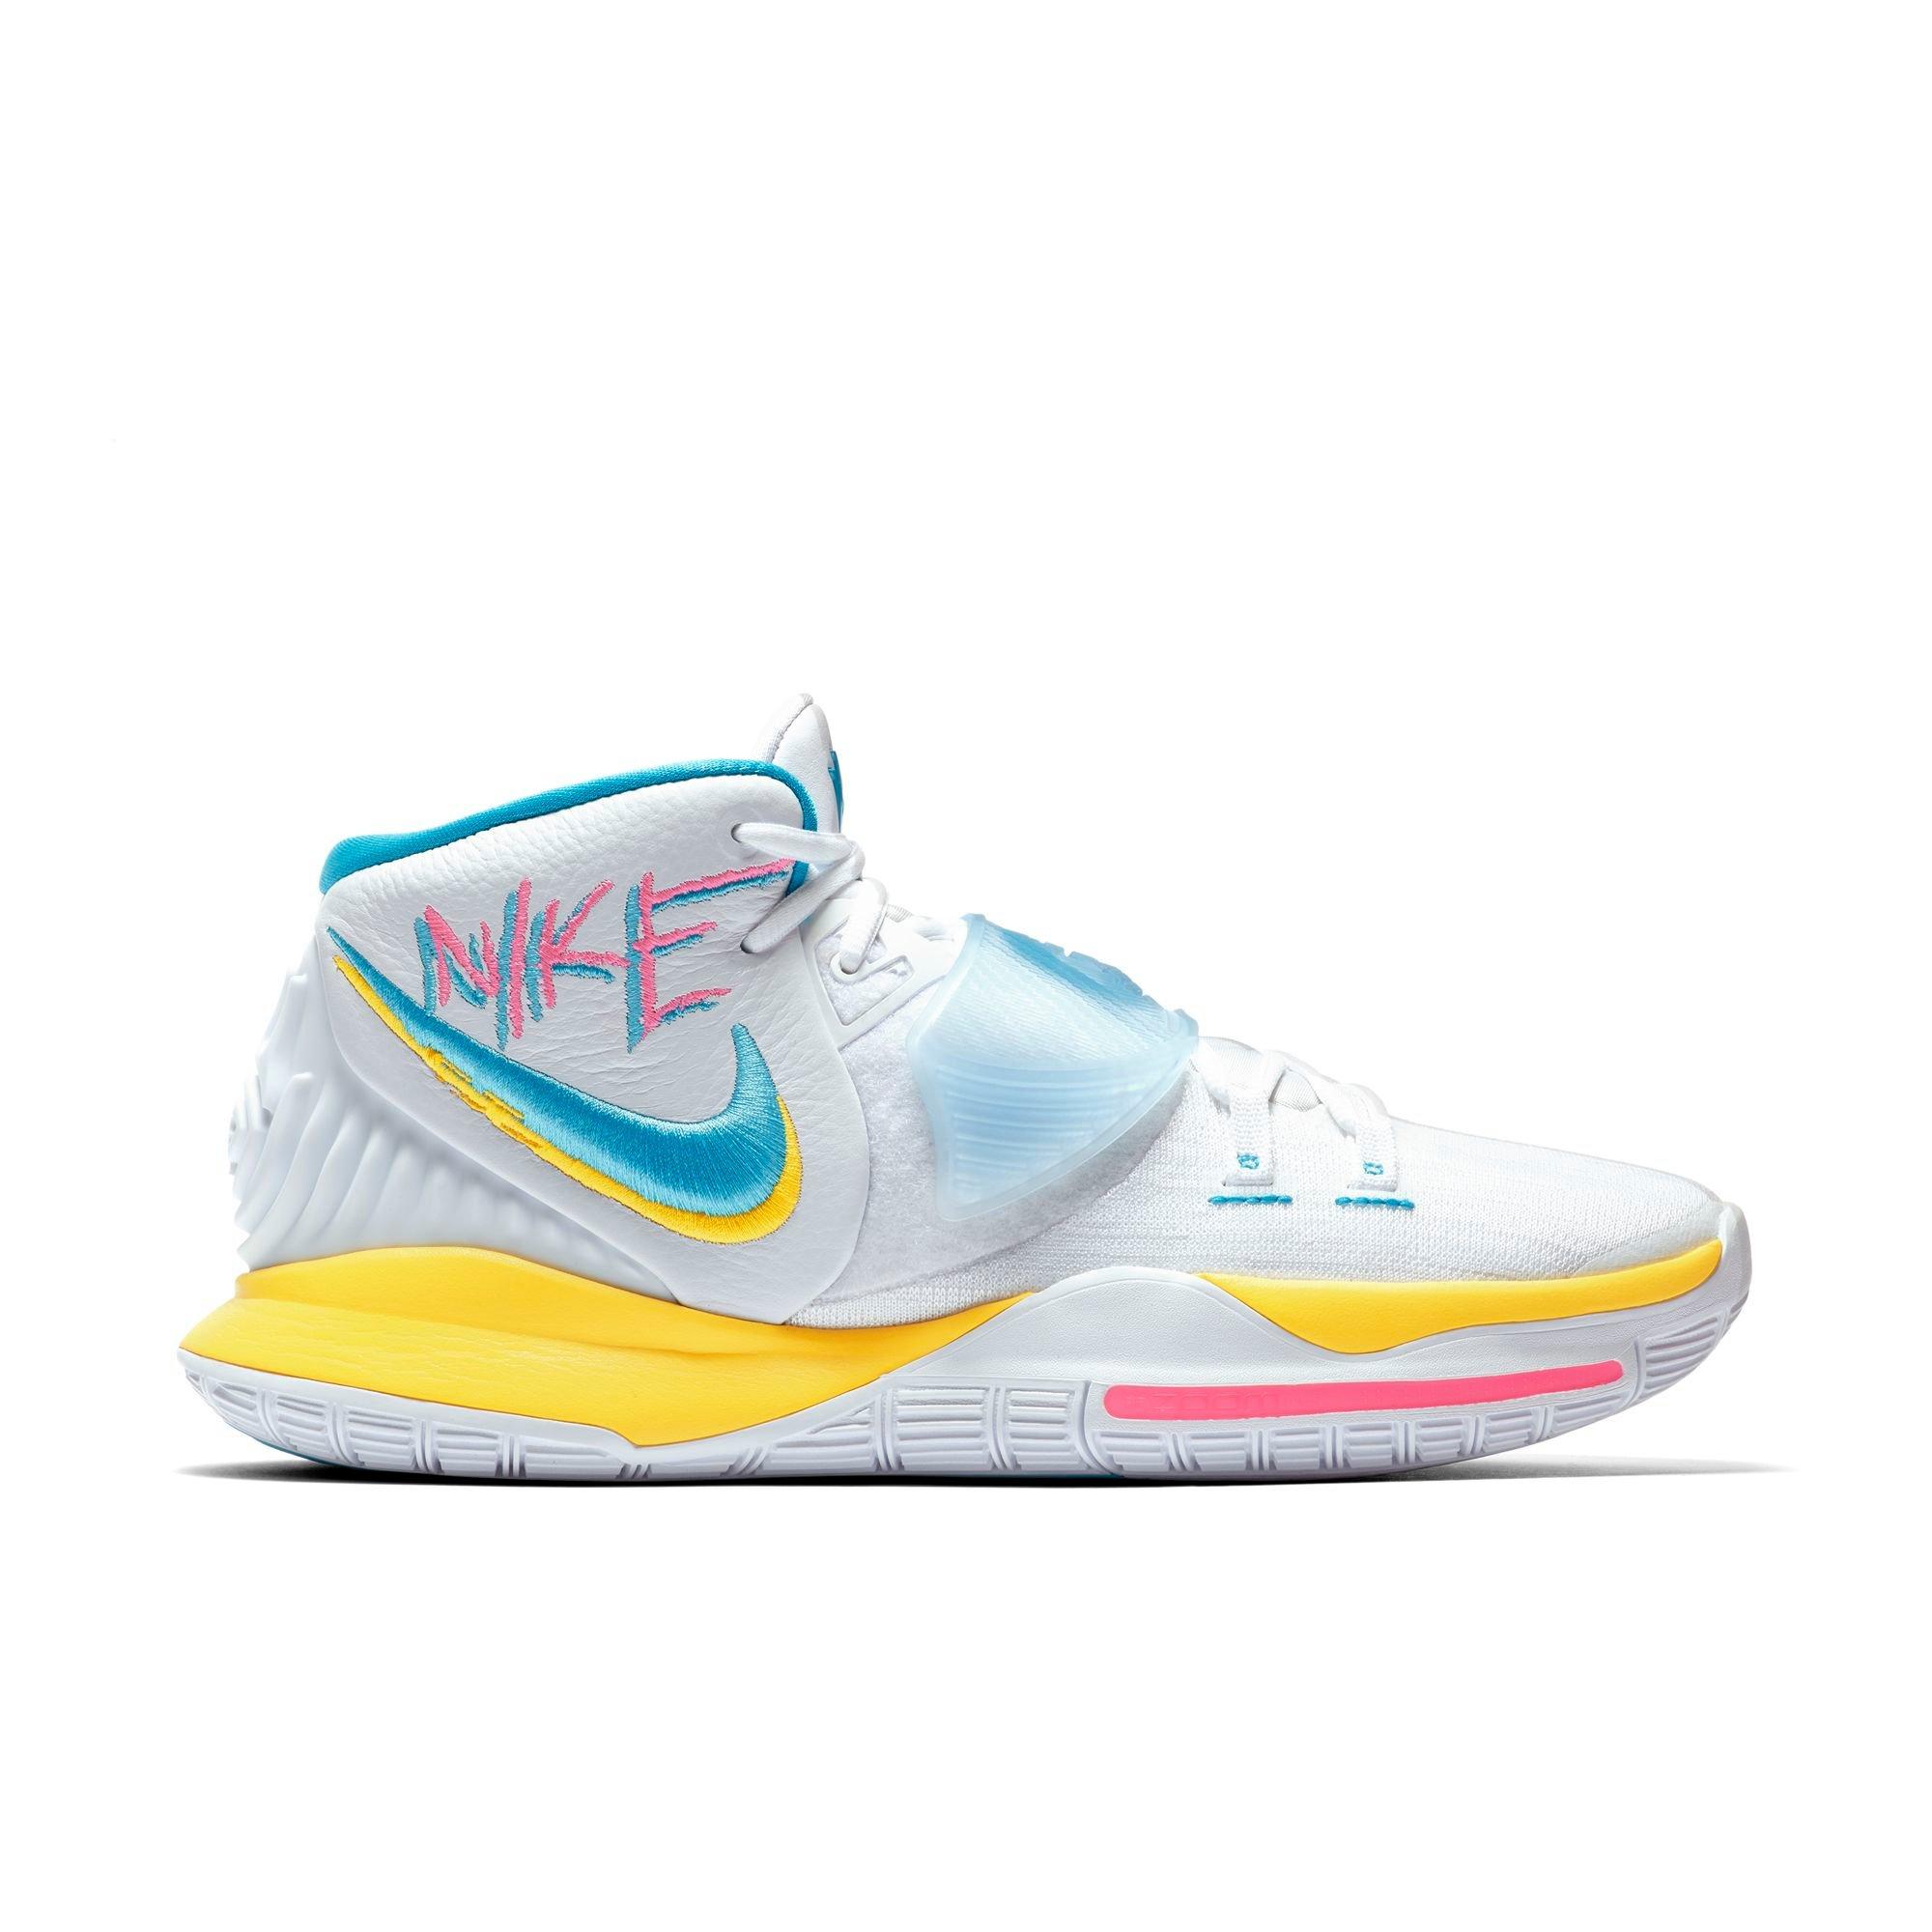 kyrie irving shoes womens yellow